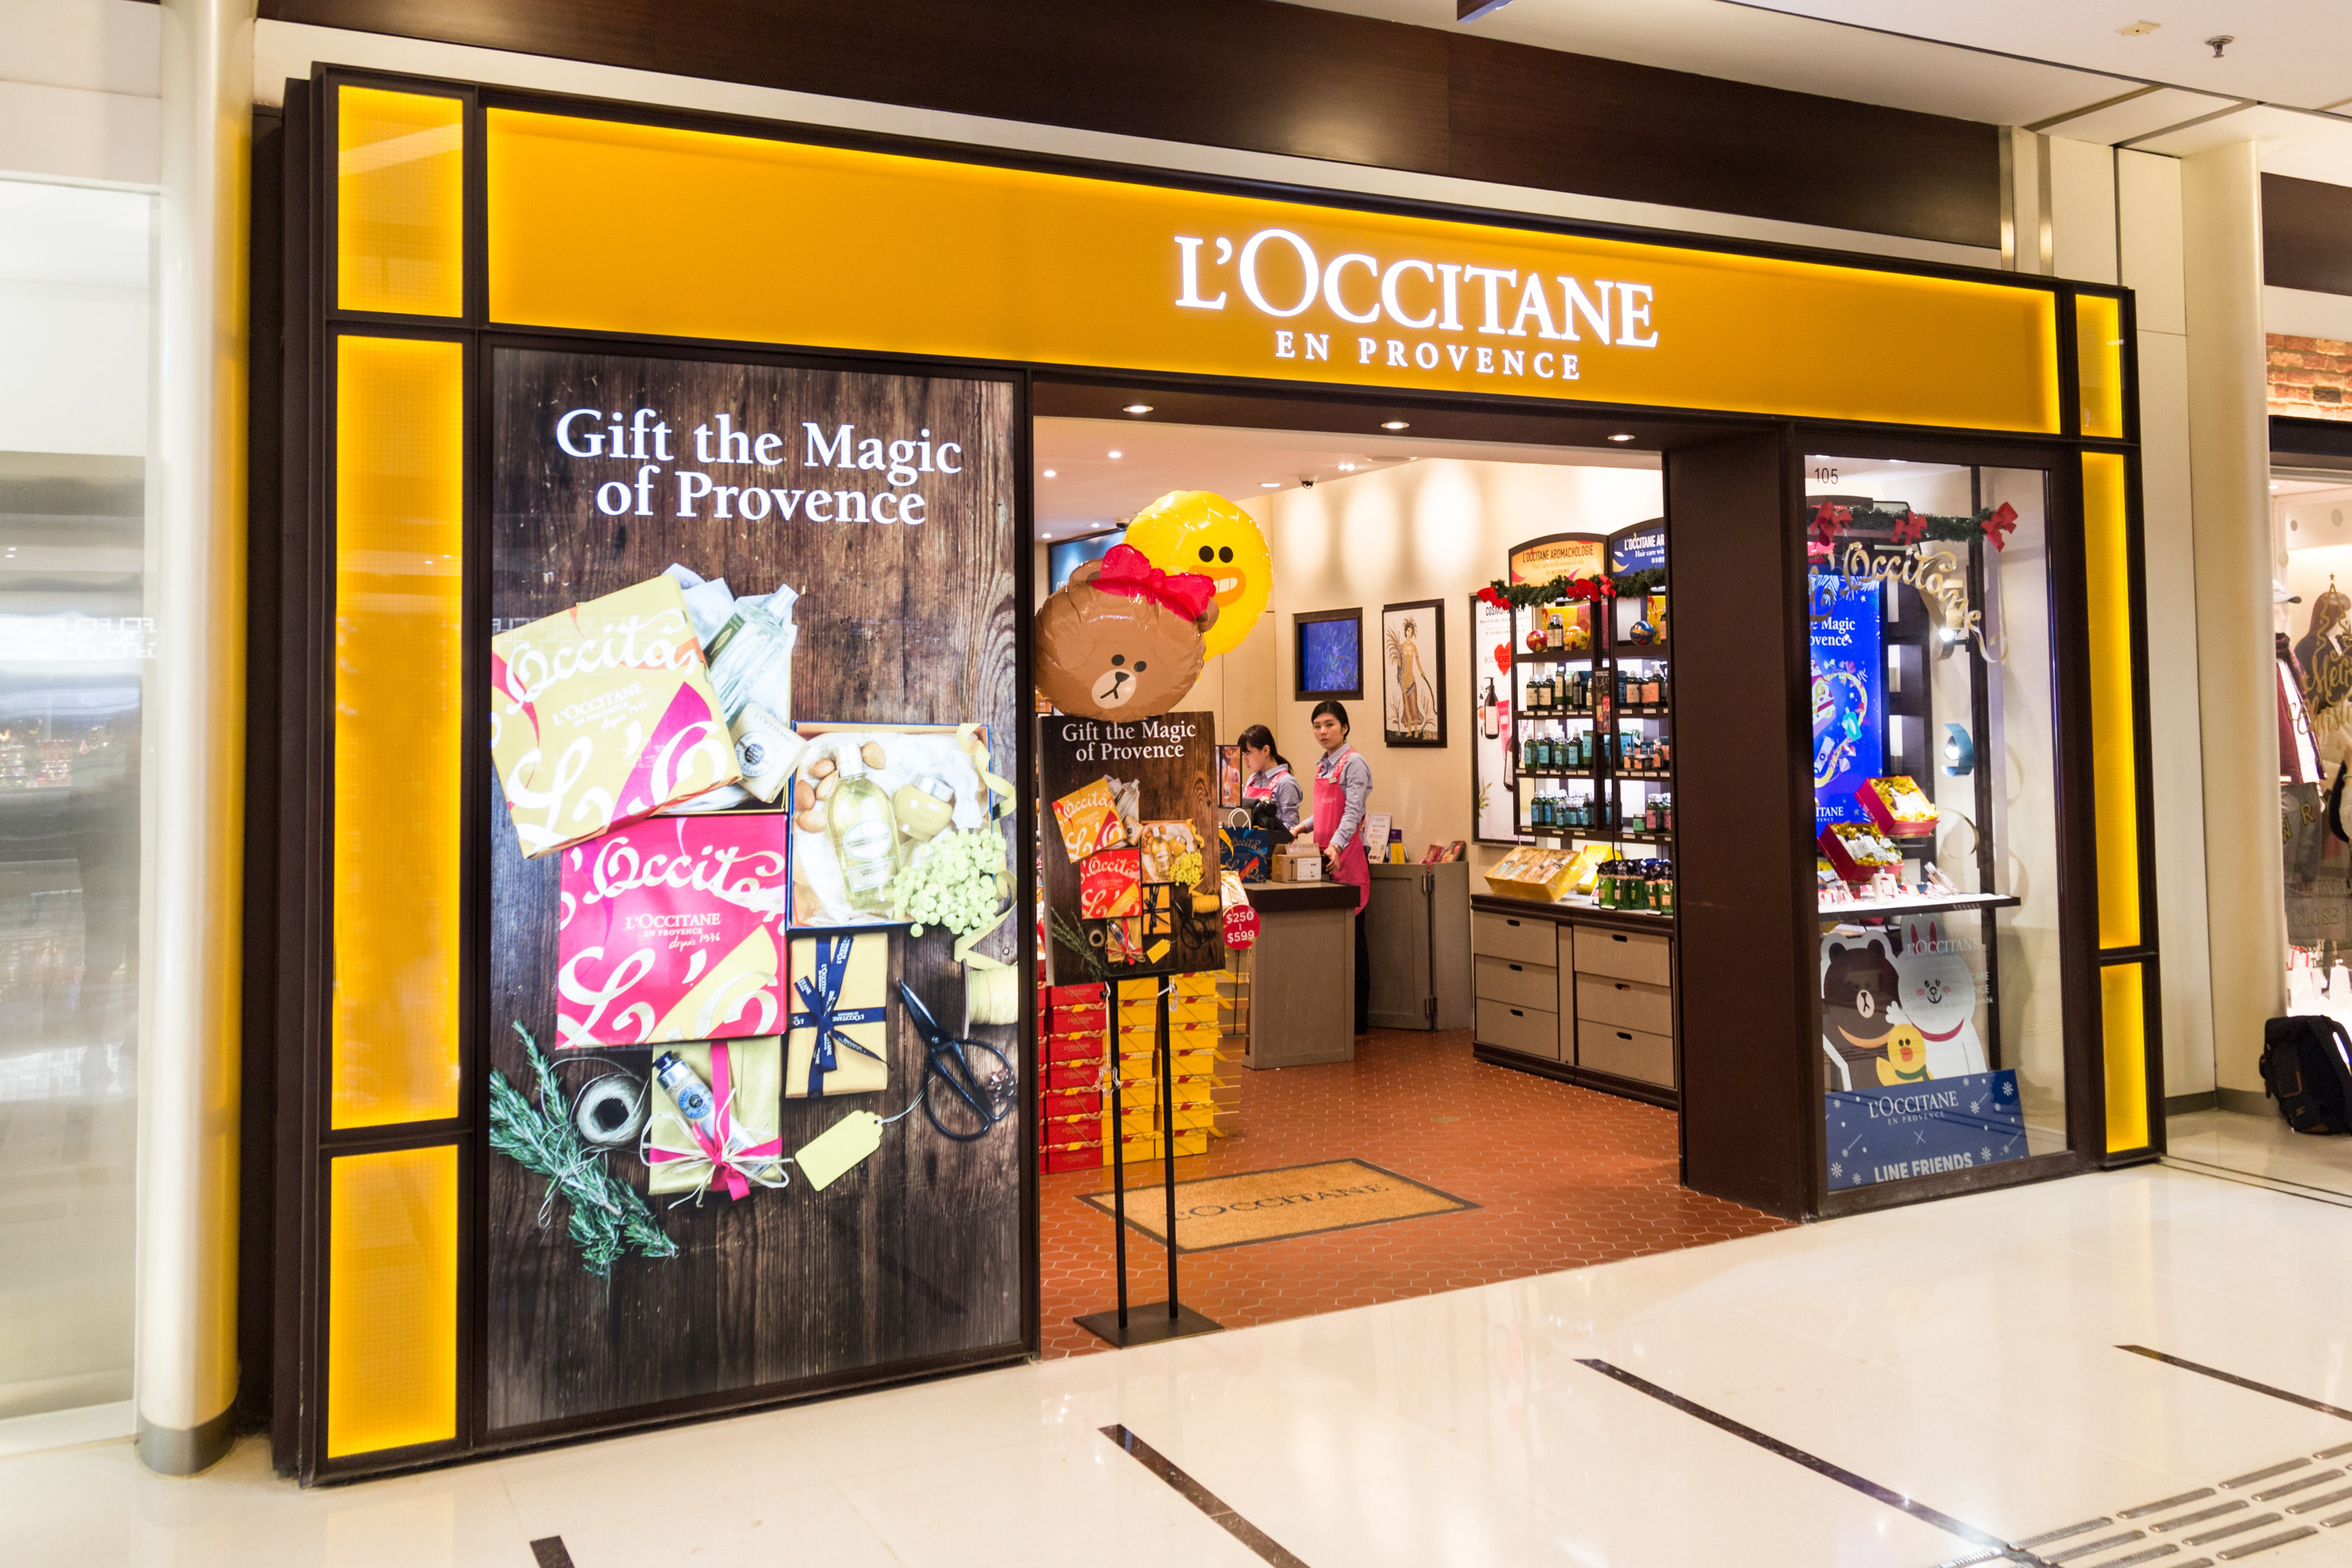 A L’Occitane outlet in Hong Kong on January 9, 2018. Photo: Shutterstock